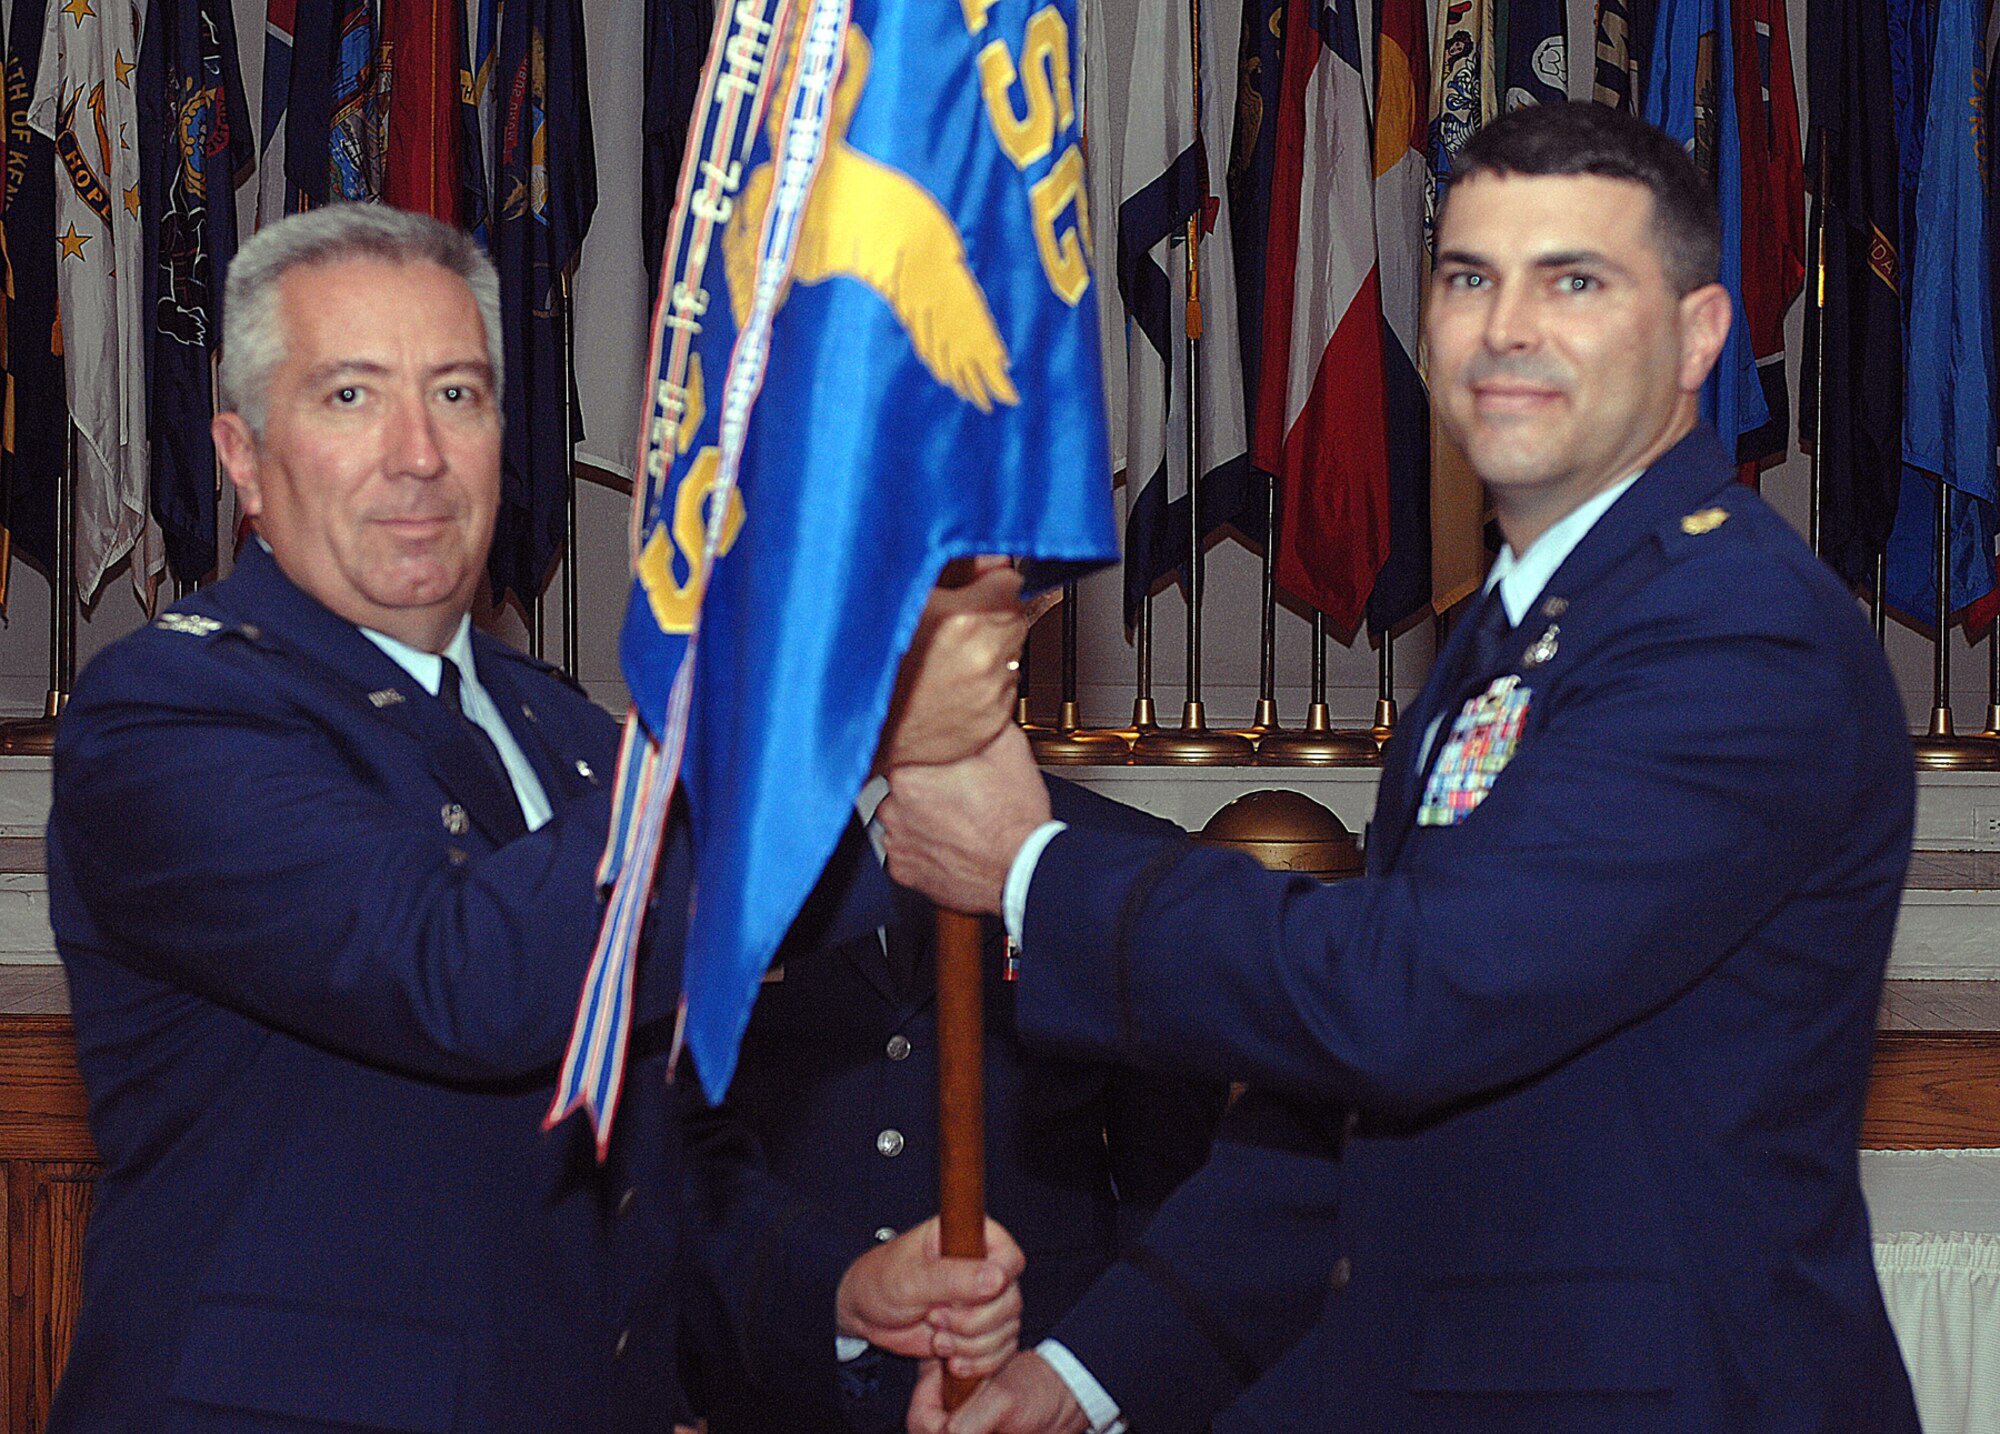 DYESS AIR FORCE BASE, Texas -- Major Kelly Kanapaux assumes command of the 7th Communtications Squadron from Colonel James Hammes, 7th Mission Support Group commander, at a change of command ceremony July 9. (U.S. Air Force photo by Airman 1st Class Jennifer Romig)